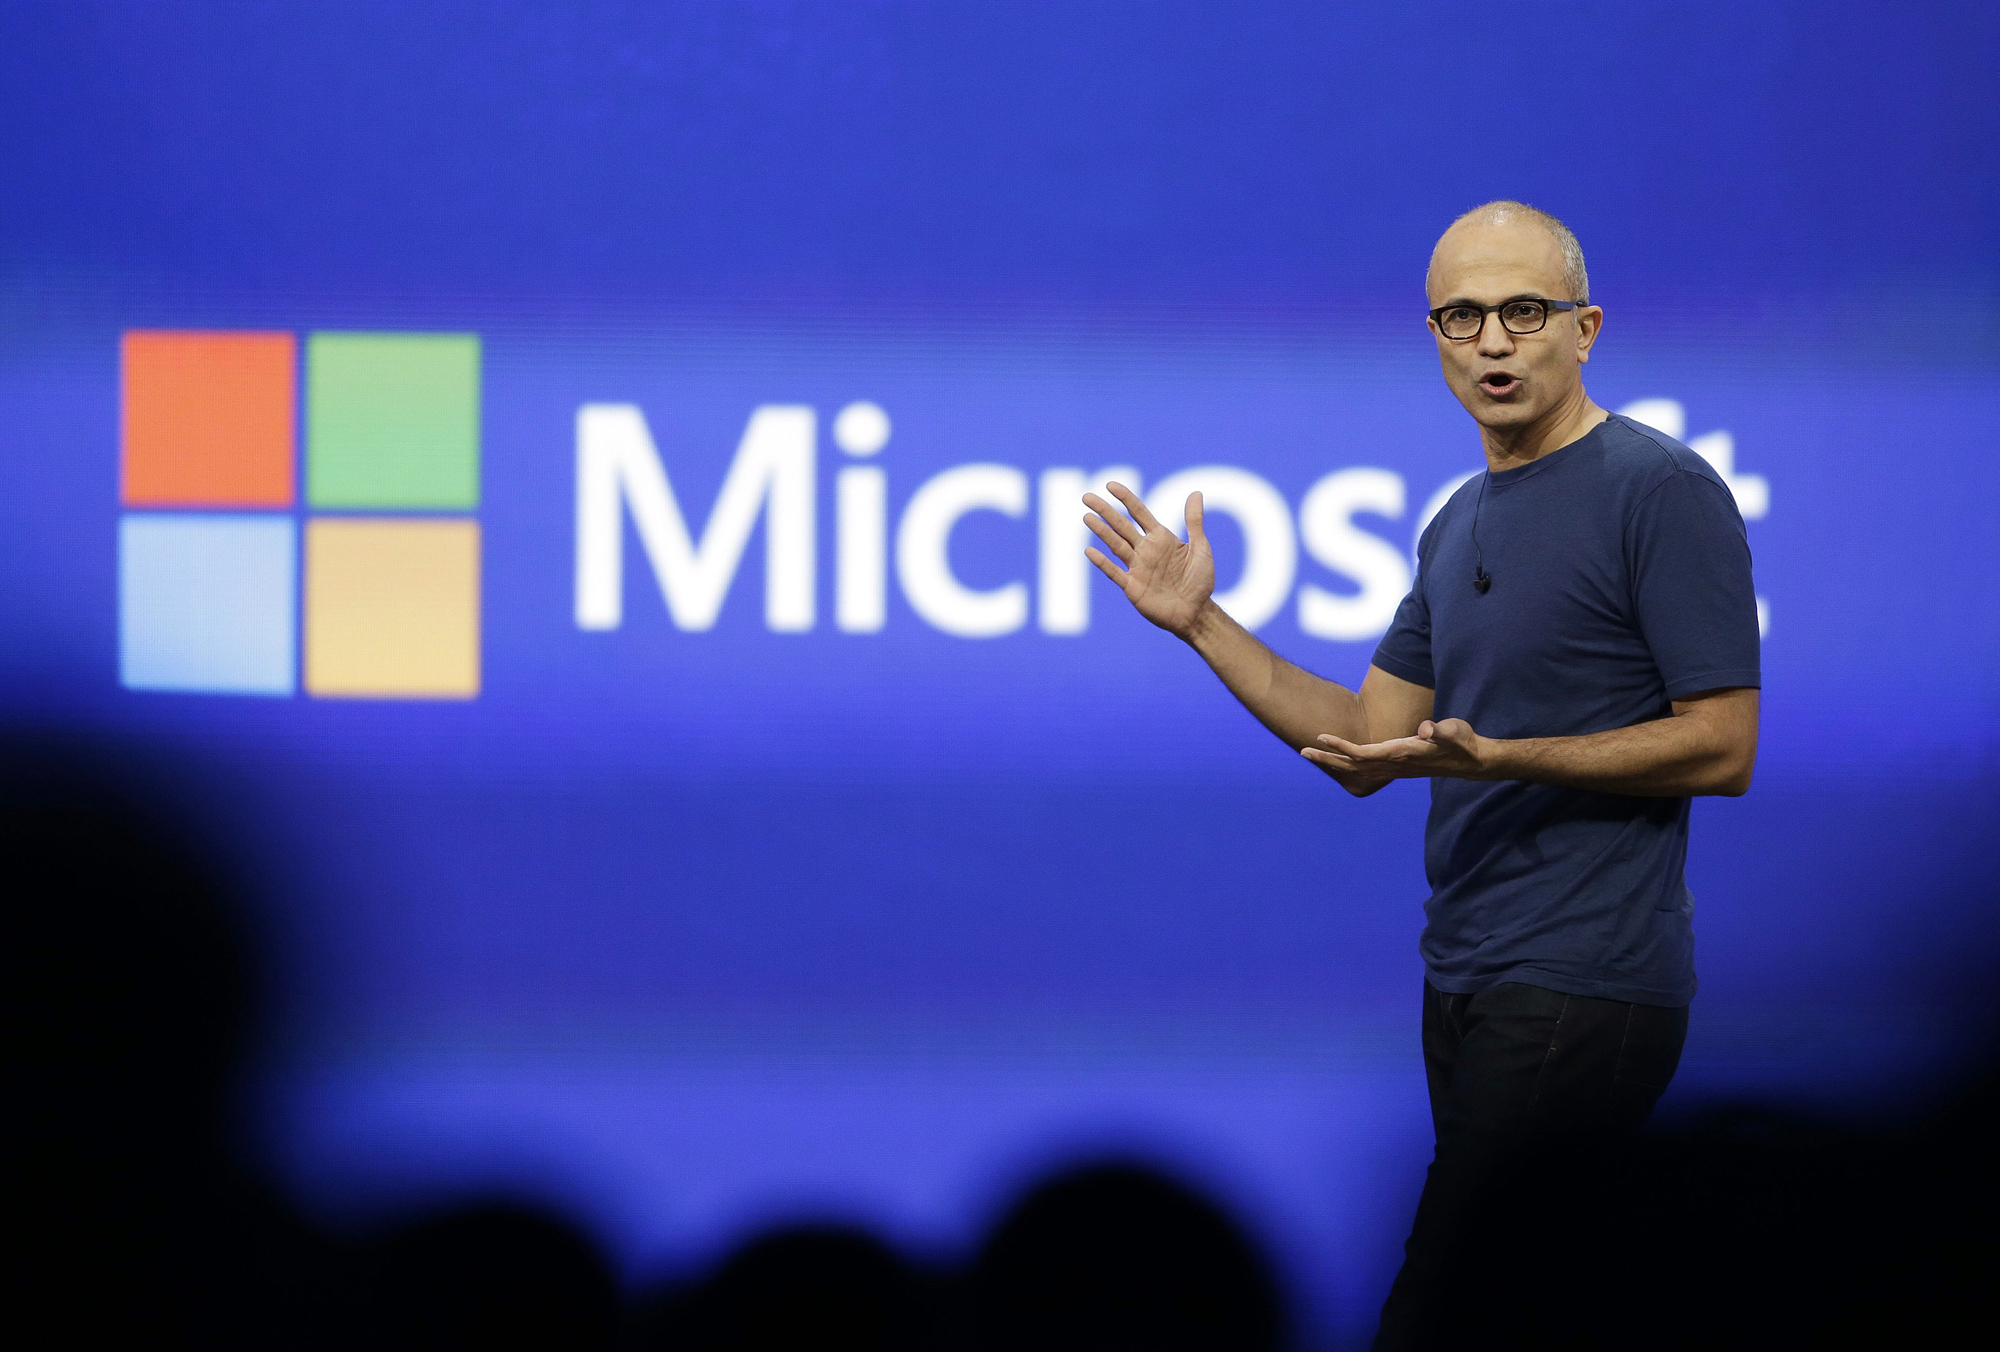 Microsoft CEO Satya Nadella gestures during the keynote address of the Build Conference in San Francisco, April 2, 2014